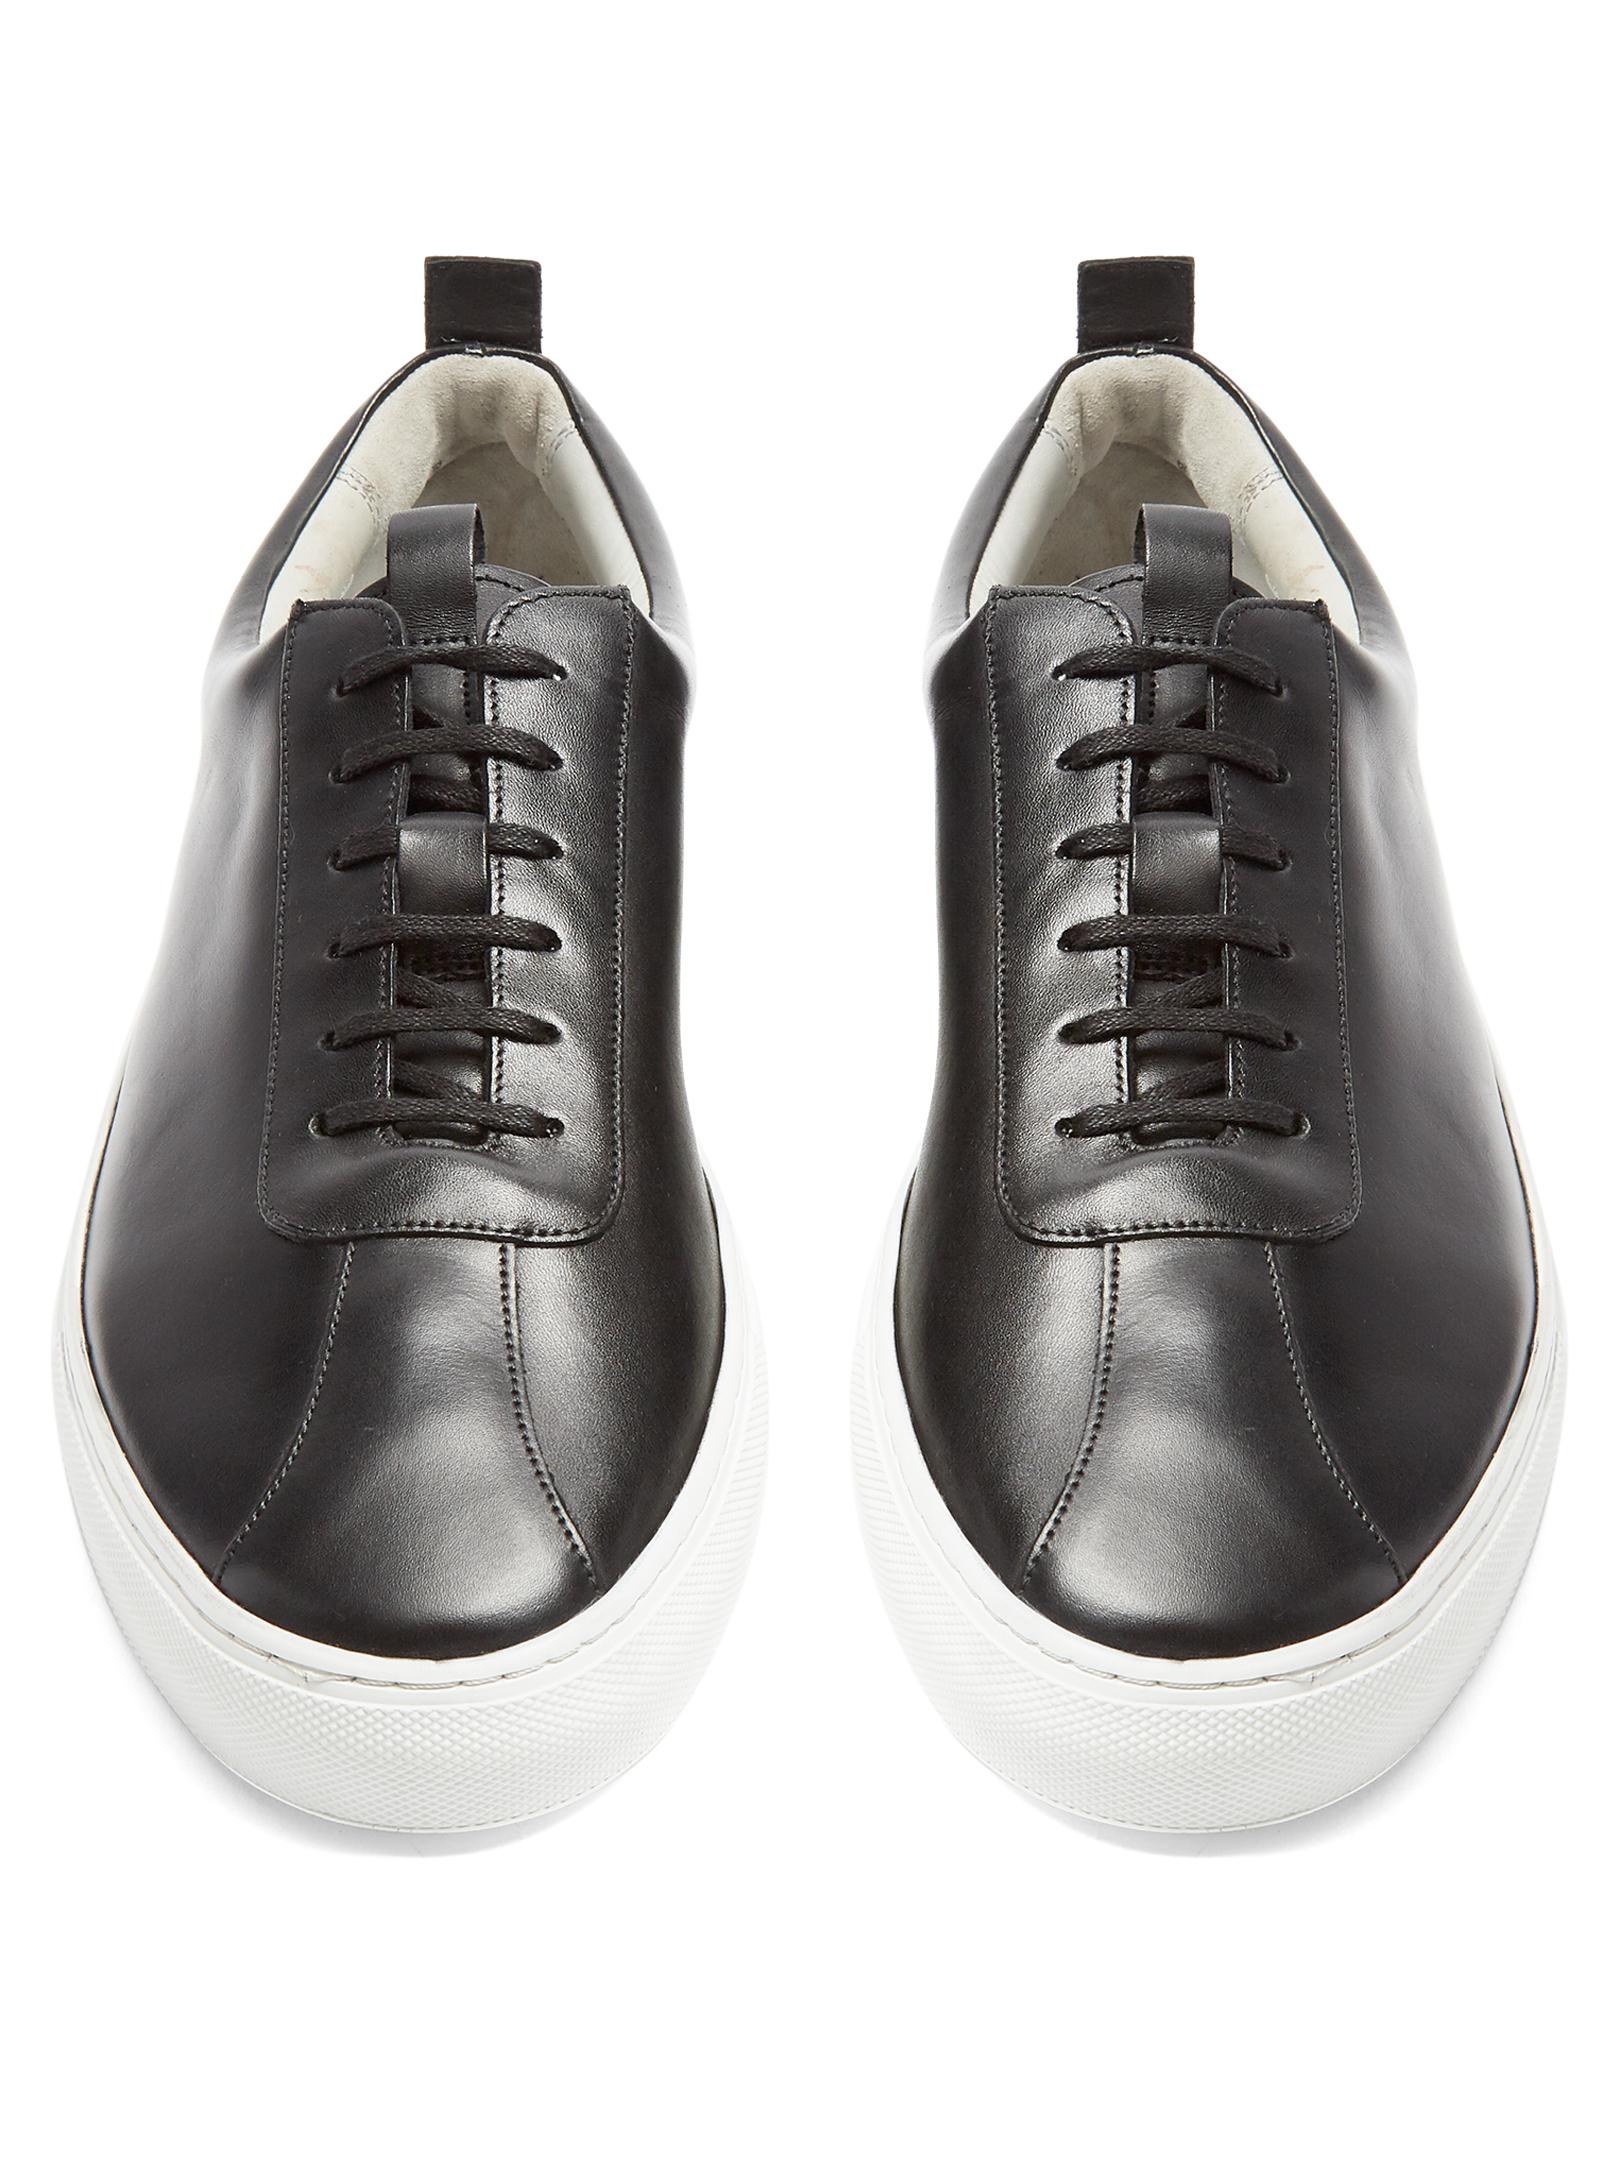 Grenson Sneaker 1 Low-top Leather Trainers in Black for Men - Lyst